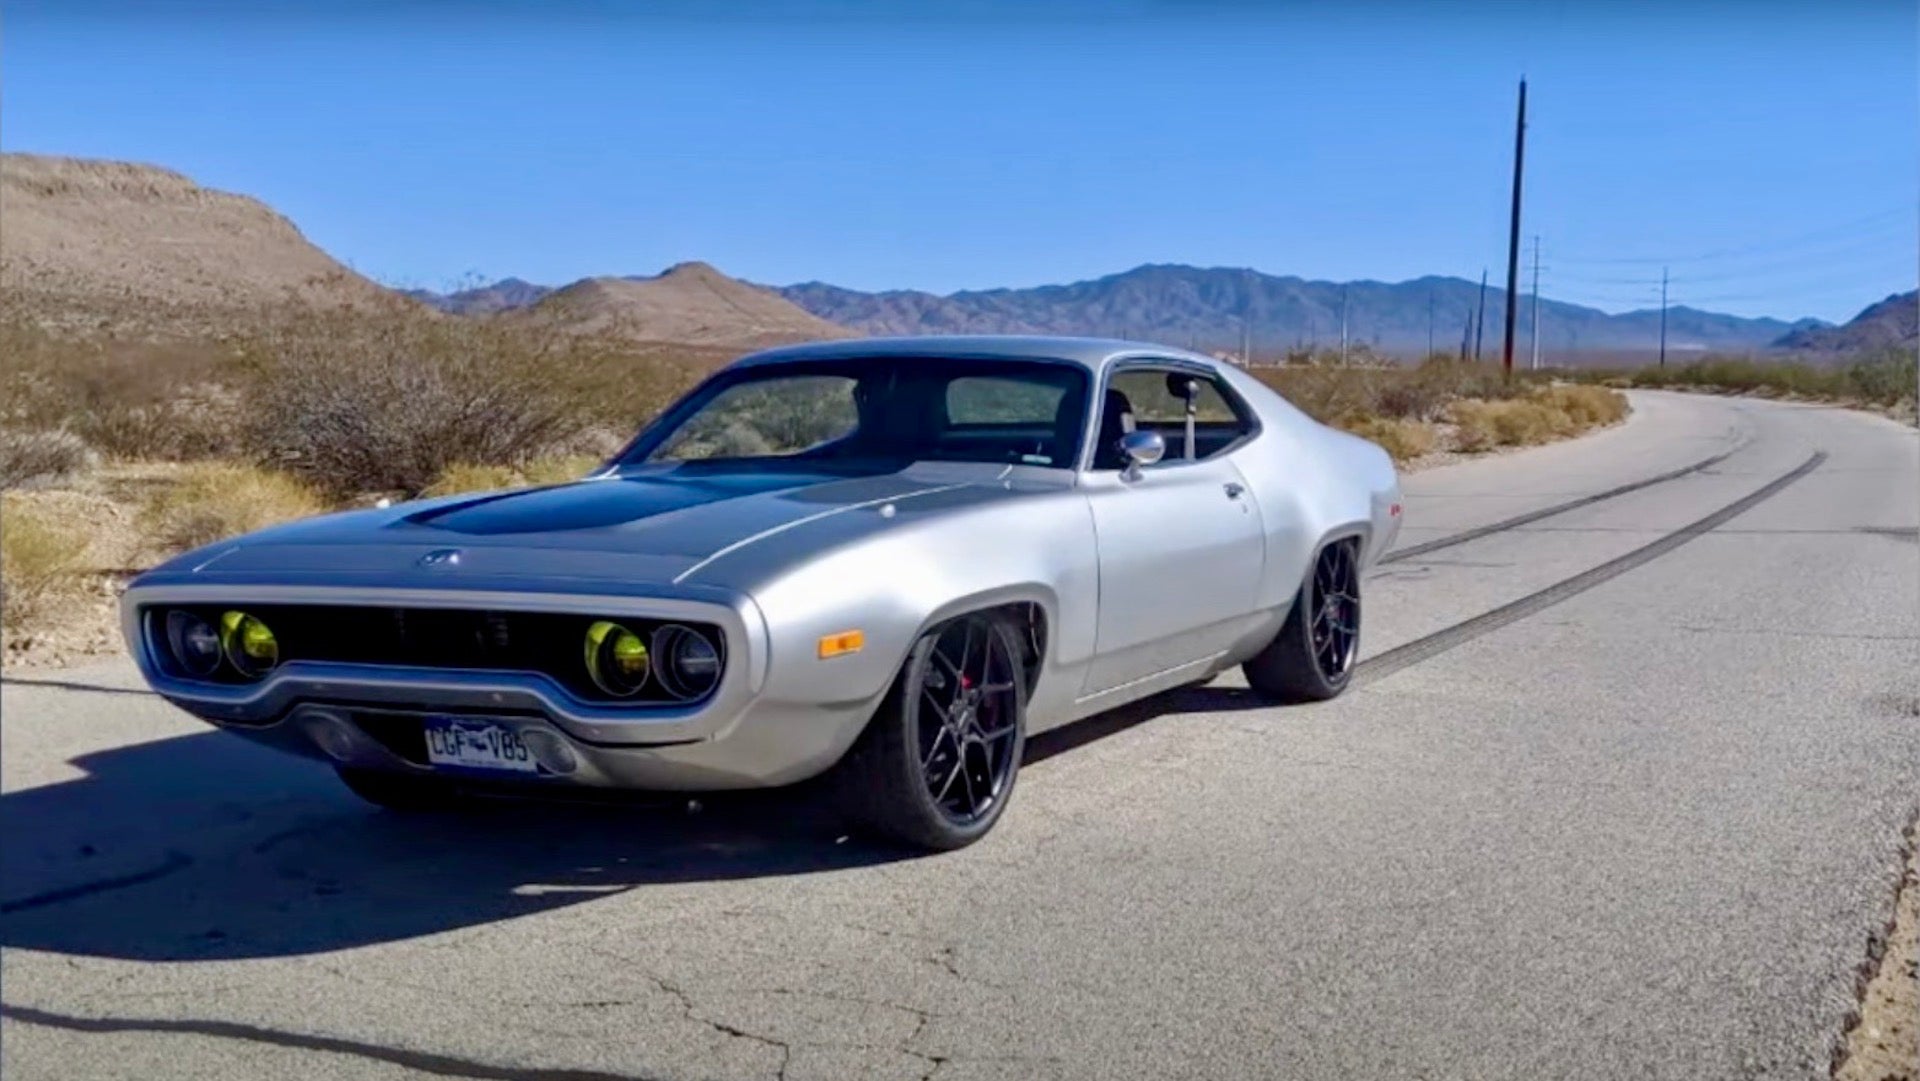 Tesla-Swapped Plymouth With Pushrod Suspension Is Restomodding Done Right